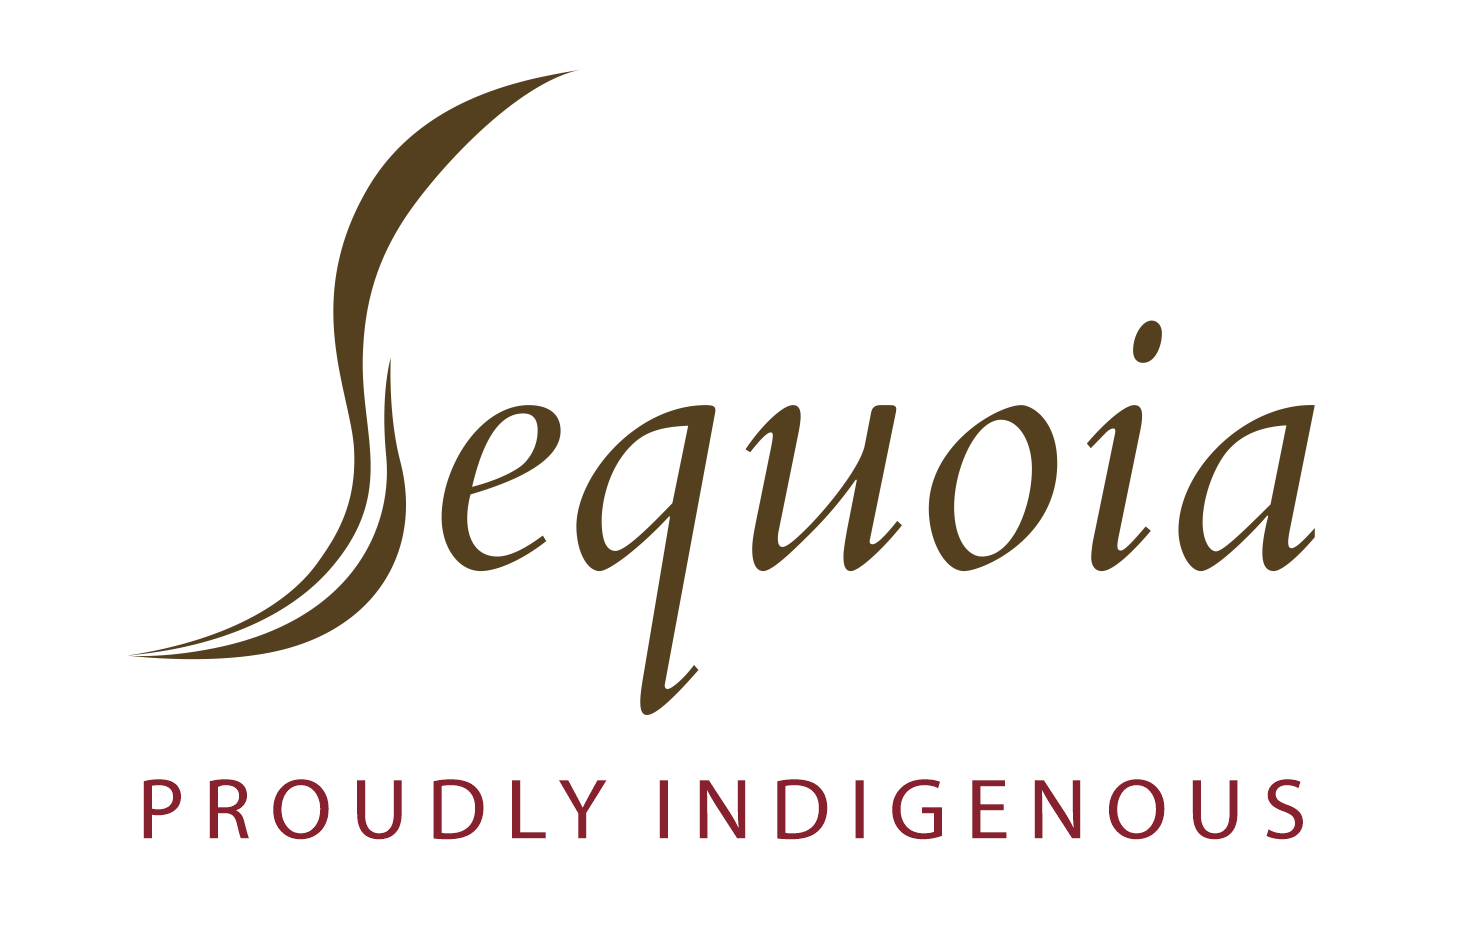 Meet the Maker – Sequoia Proudly Indigenous